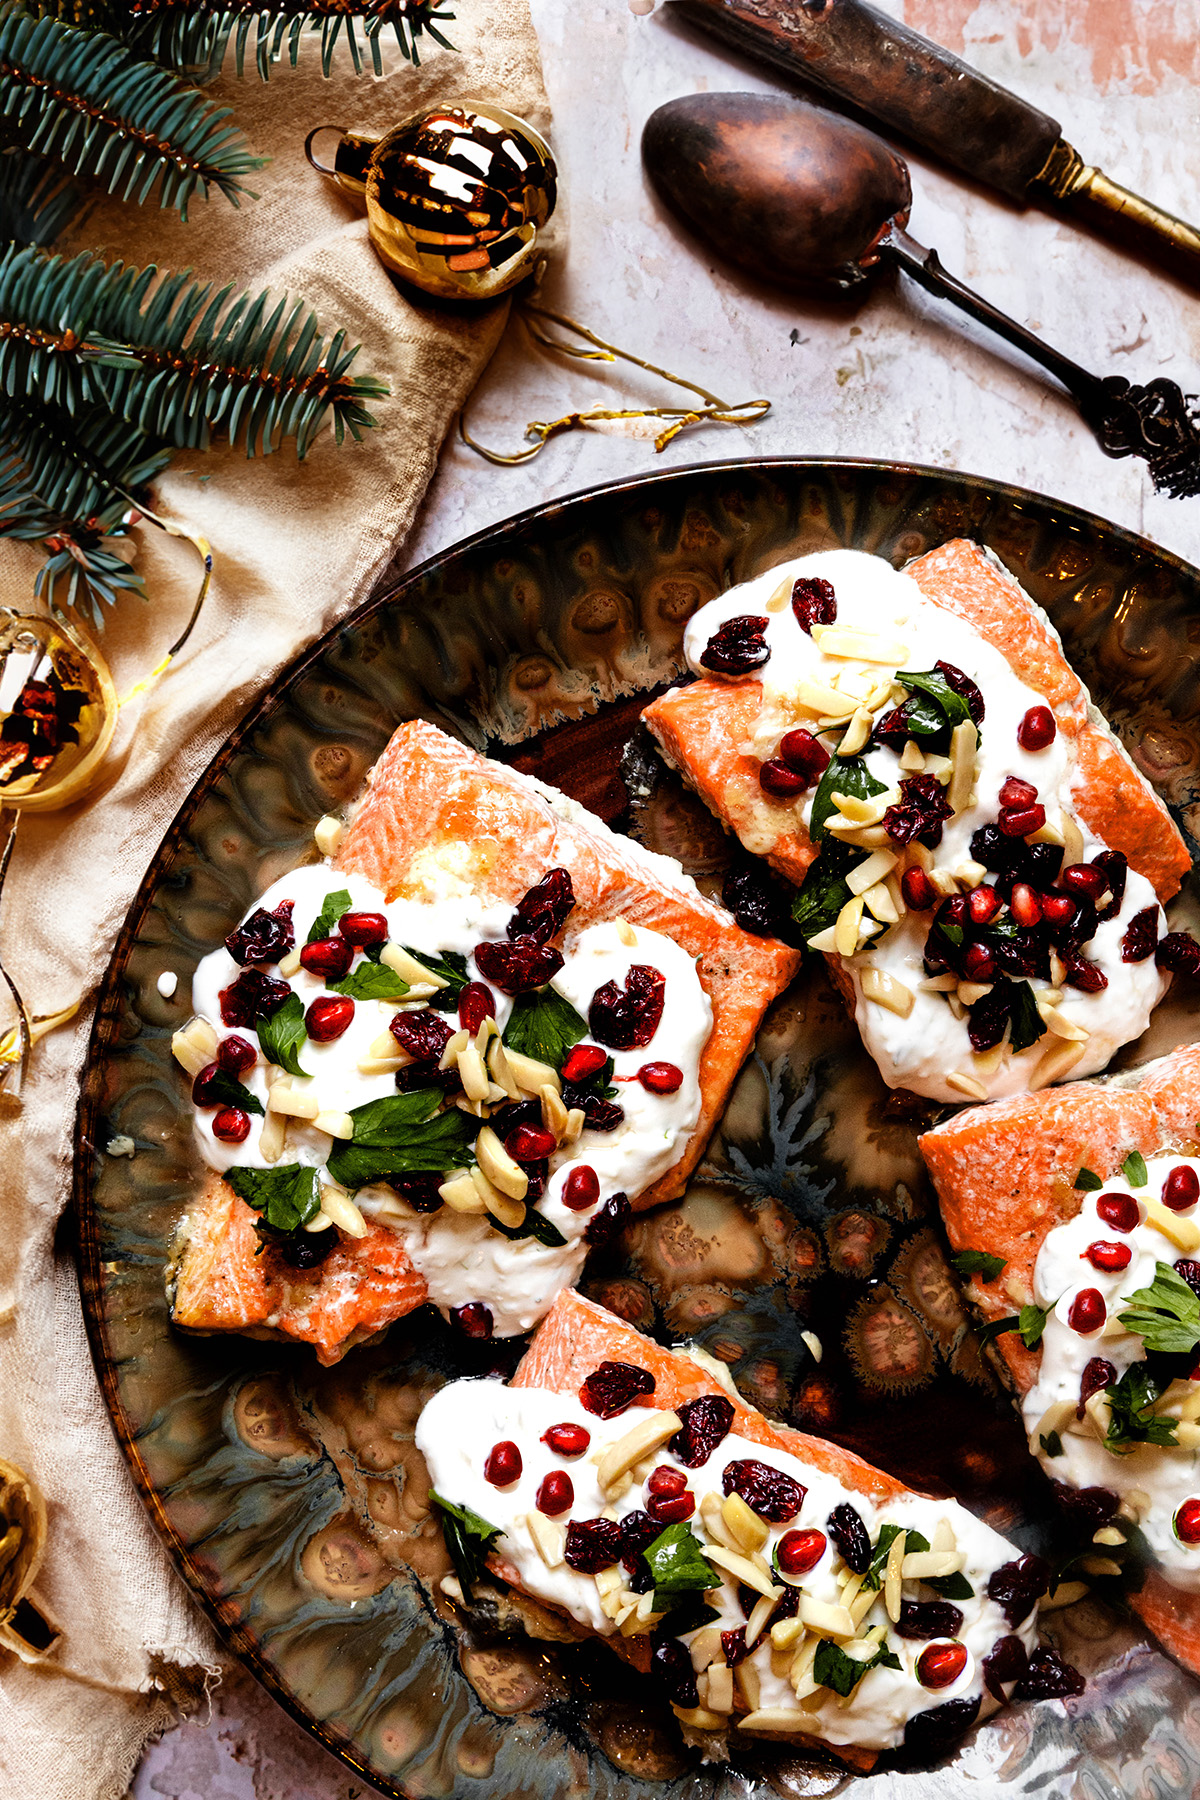 Ingredients Baked Christmas Salmon Recipe: The Best Holiday Dinner